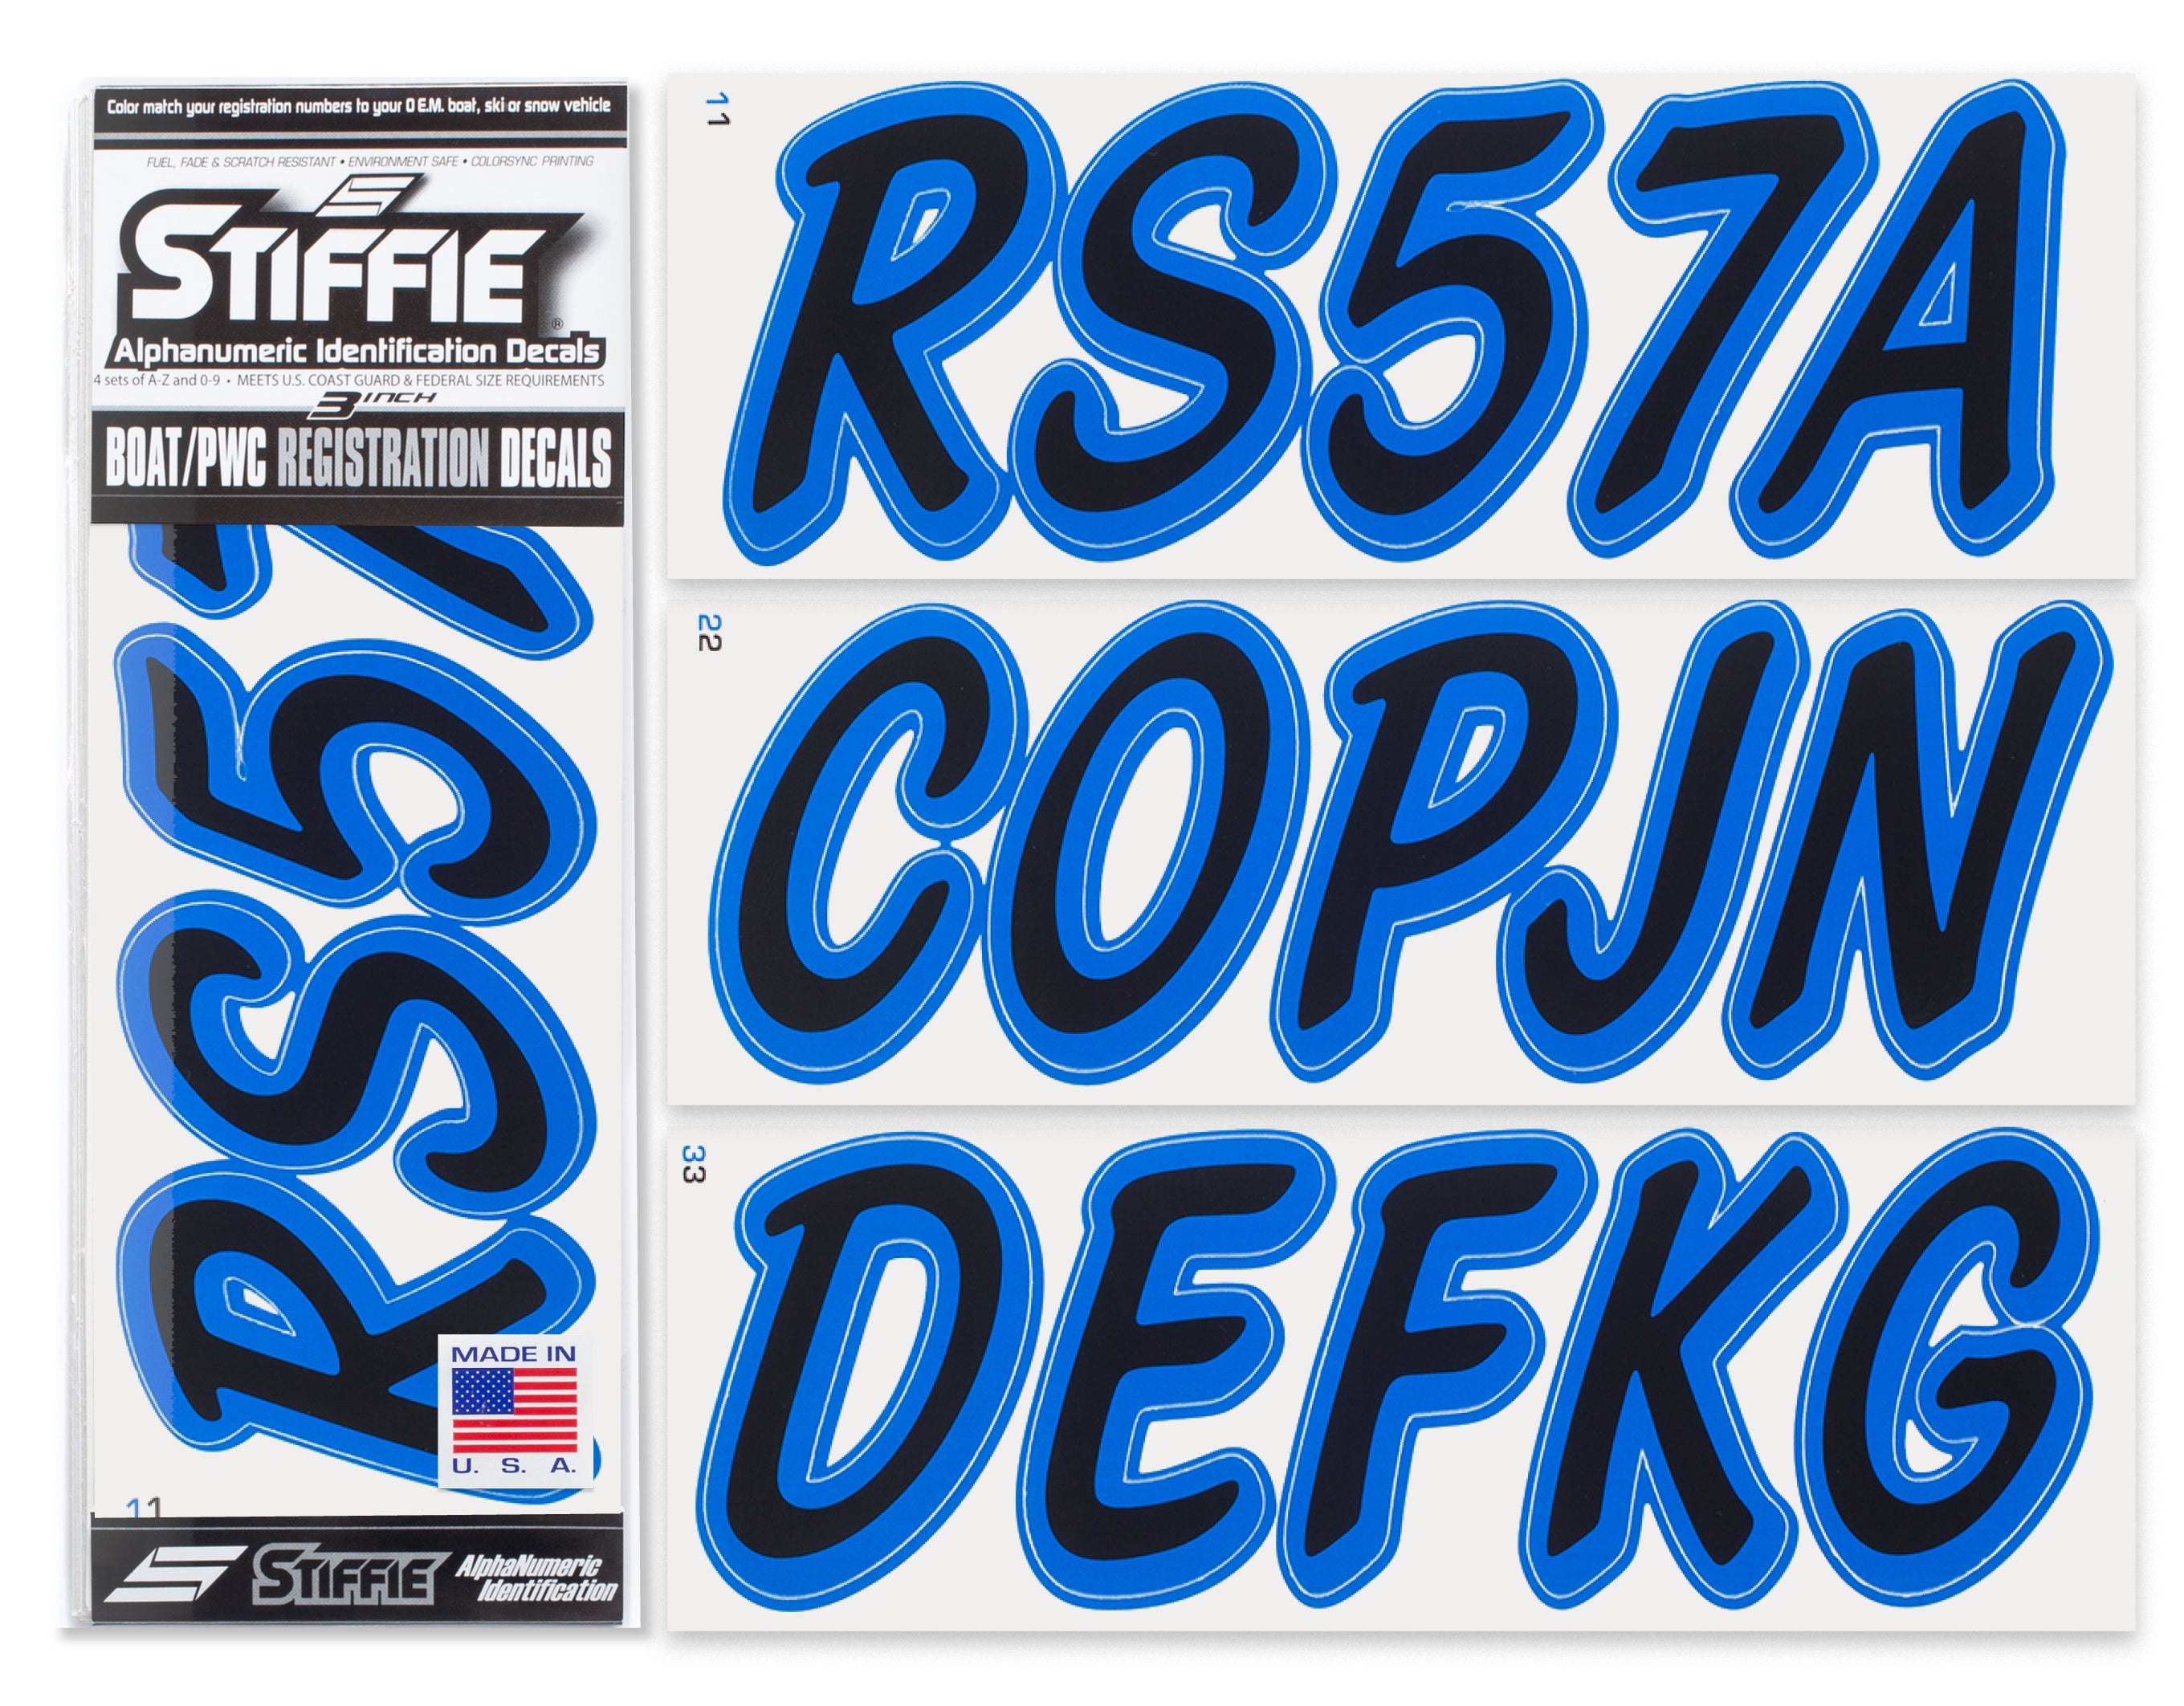 STIFFIE Whipline Solid Black/Blue 3" Alpha-Numeric Registration Identification Numbers Stickers Decals for Boats & Personal Watercraft